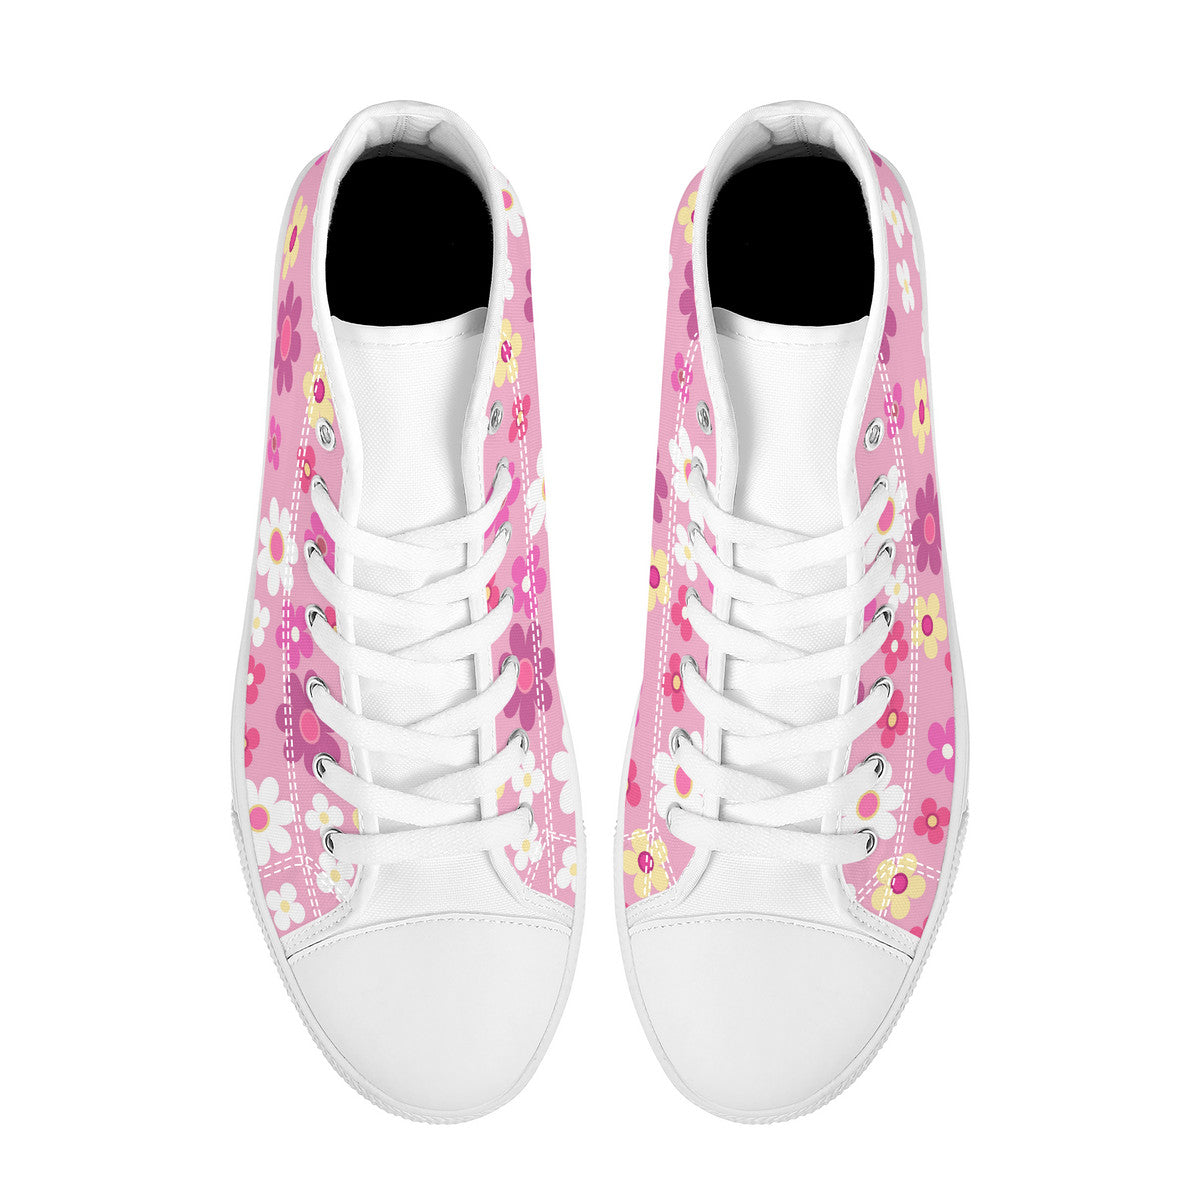 Kasumi Mist Pink High-Top Shoes